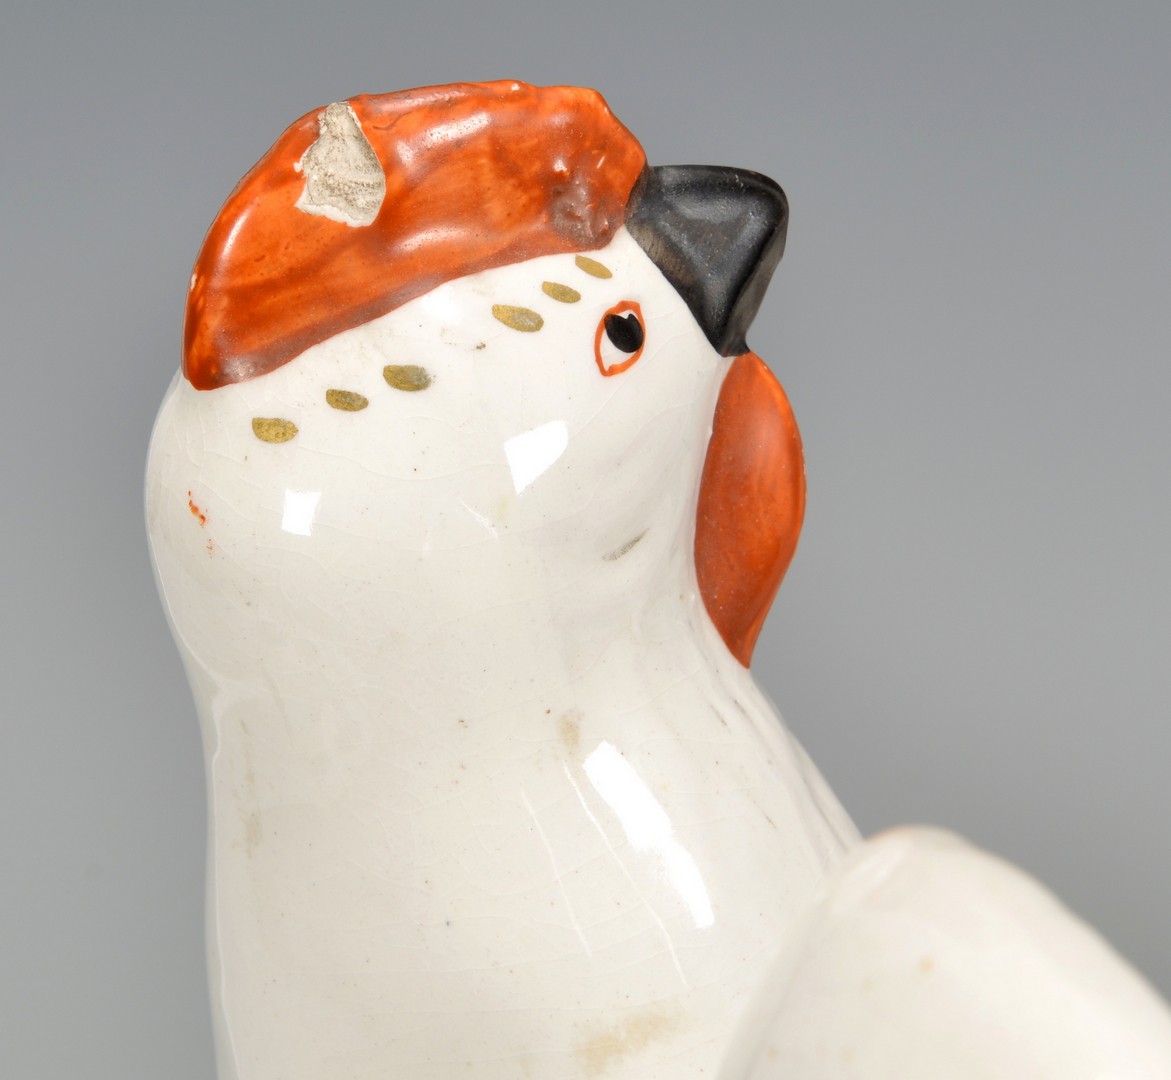 Lot 589: Pair English Staffordshire Roosters or Cockerels